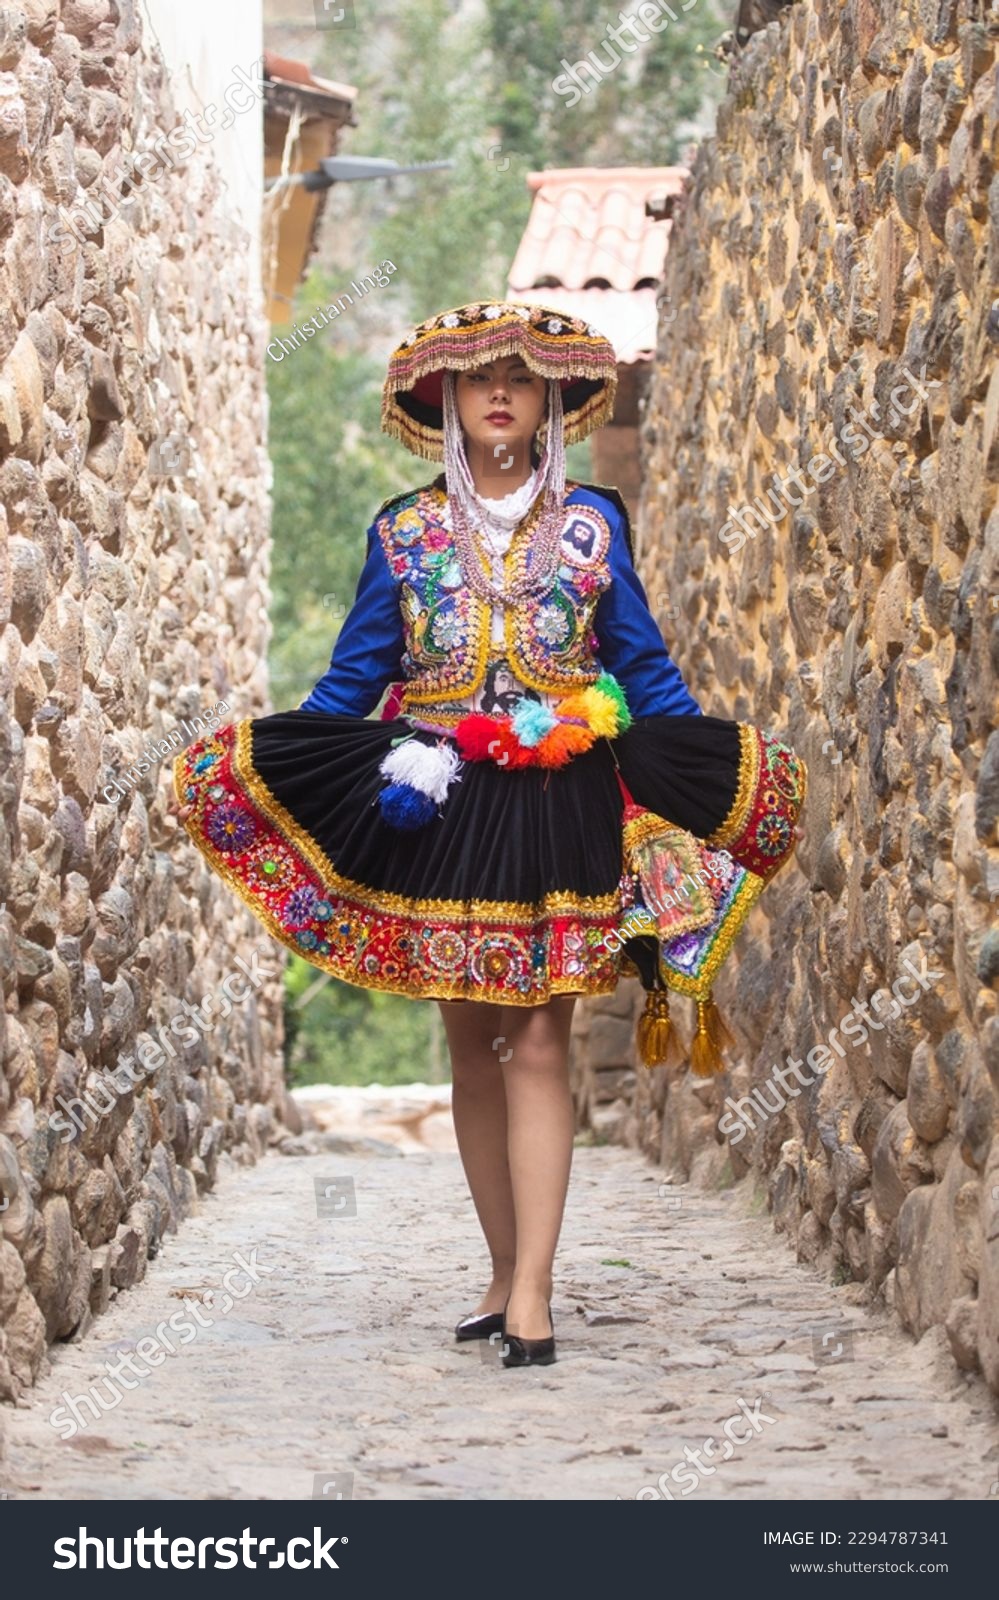 Beautiful girl with traditional dress from Peruvian Andes culture. Young girl in Ollantaytambo city in Incas Sacred Valley in Cusco Peru. #2294787341